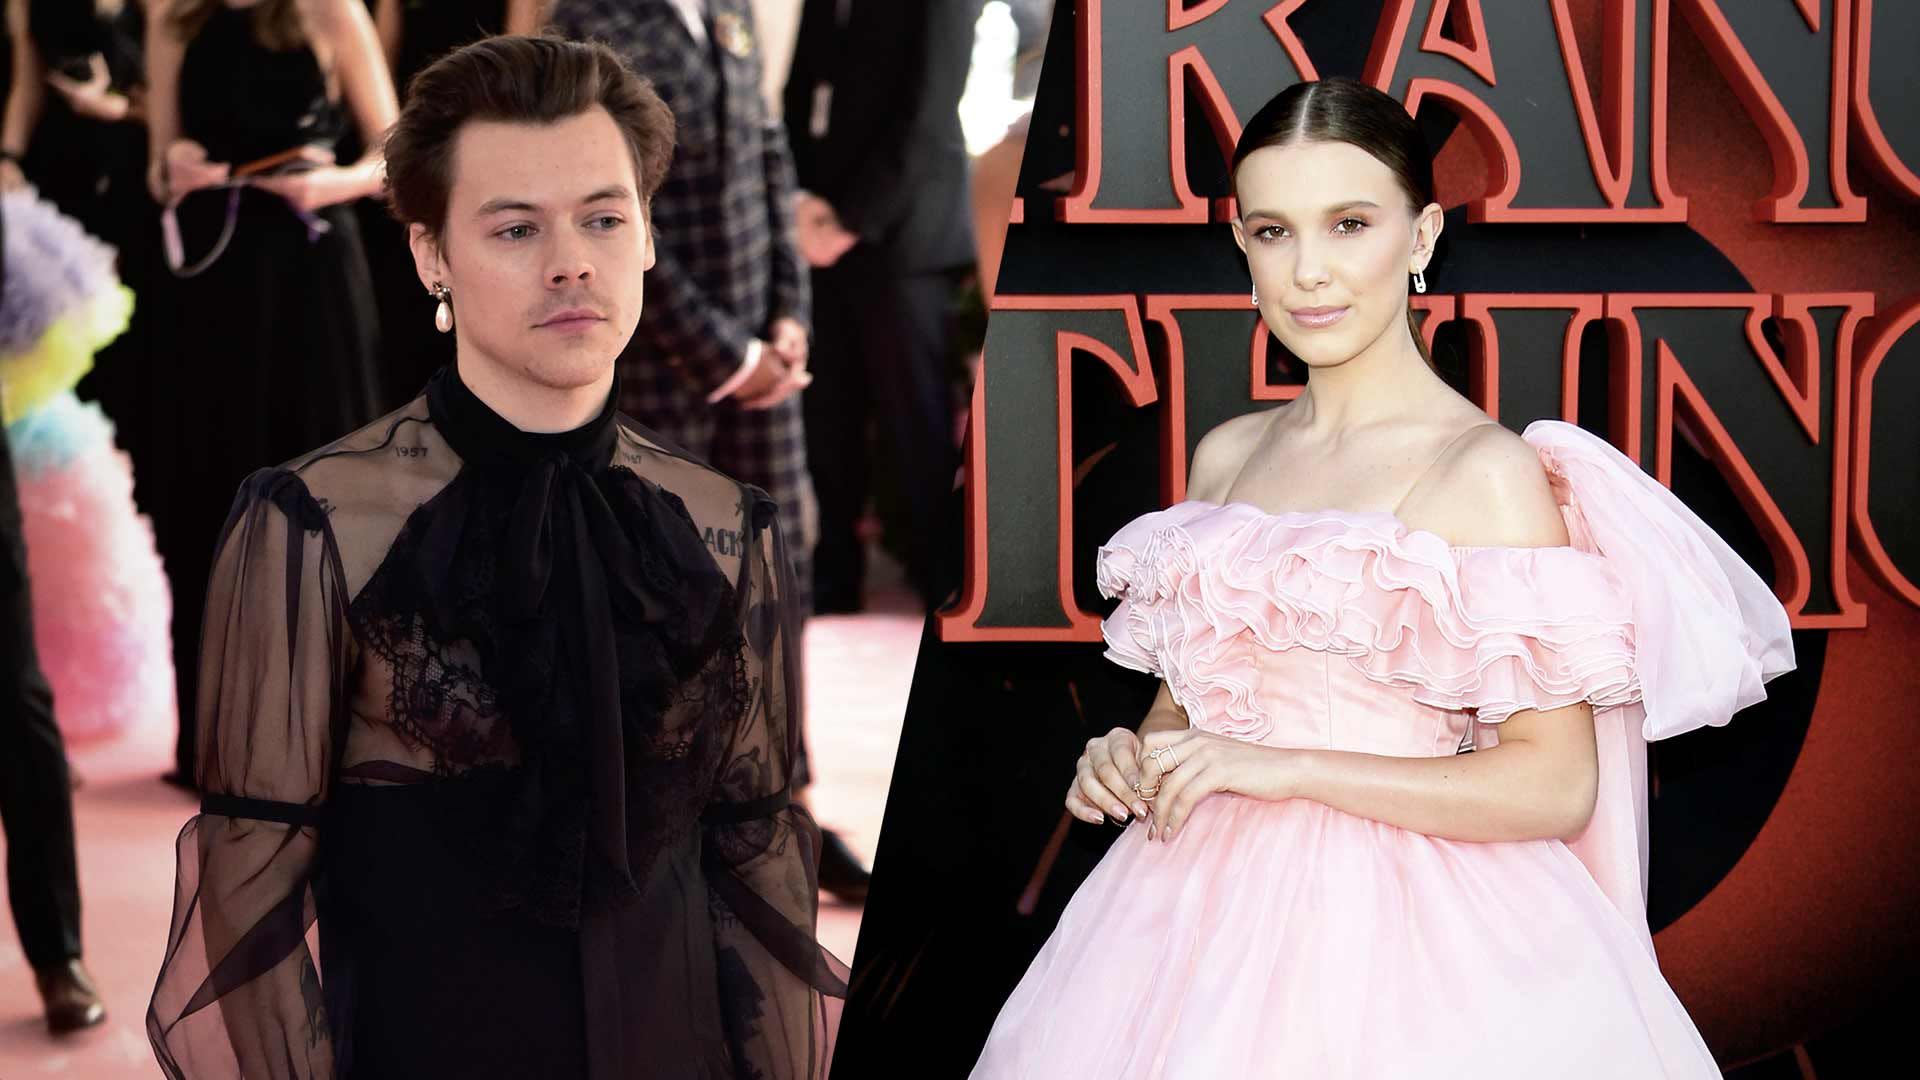 Harry Styles And Millie Bobby Brown Spotting Dancing Together At Images, Photos, Reviews